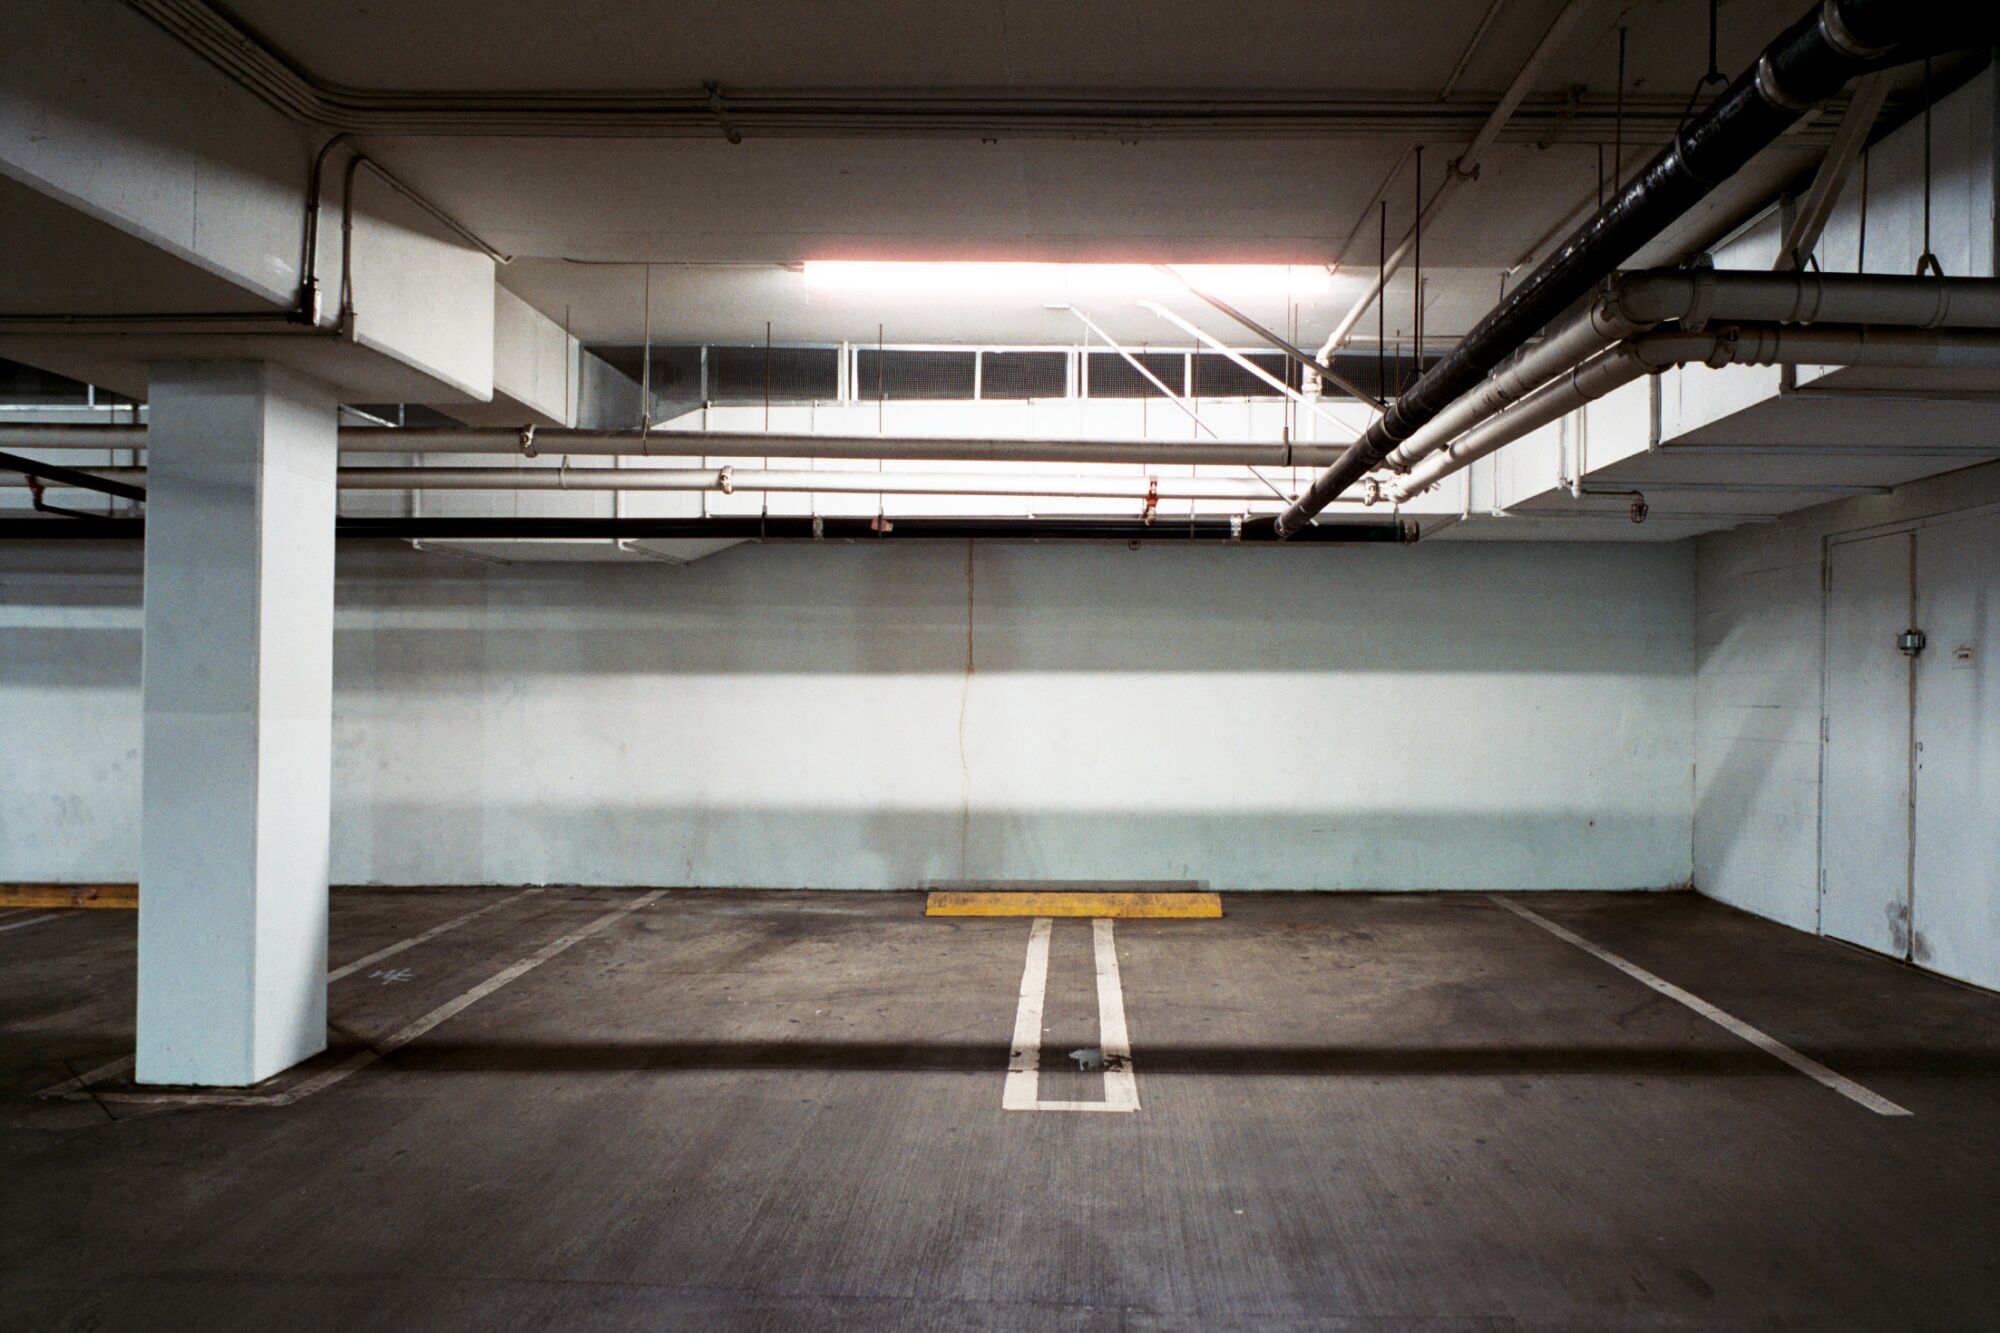 Two parking spaces lit with fluorescent light